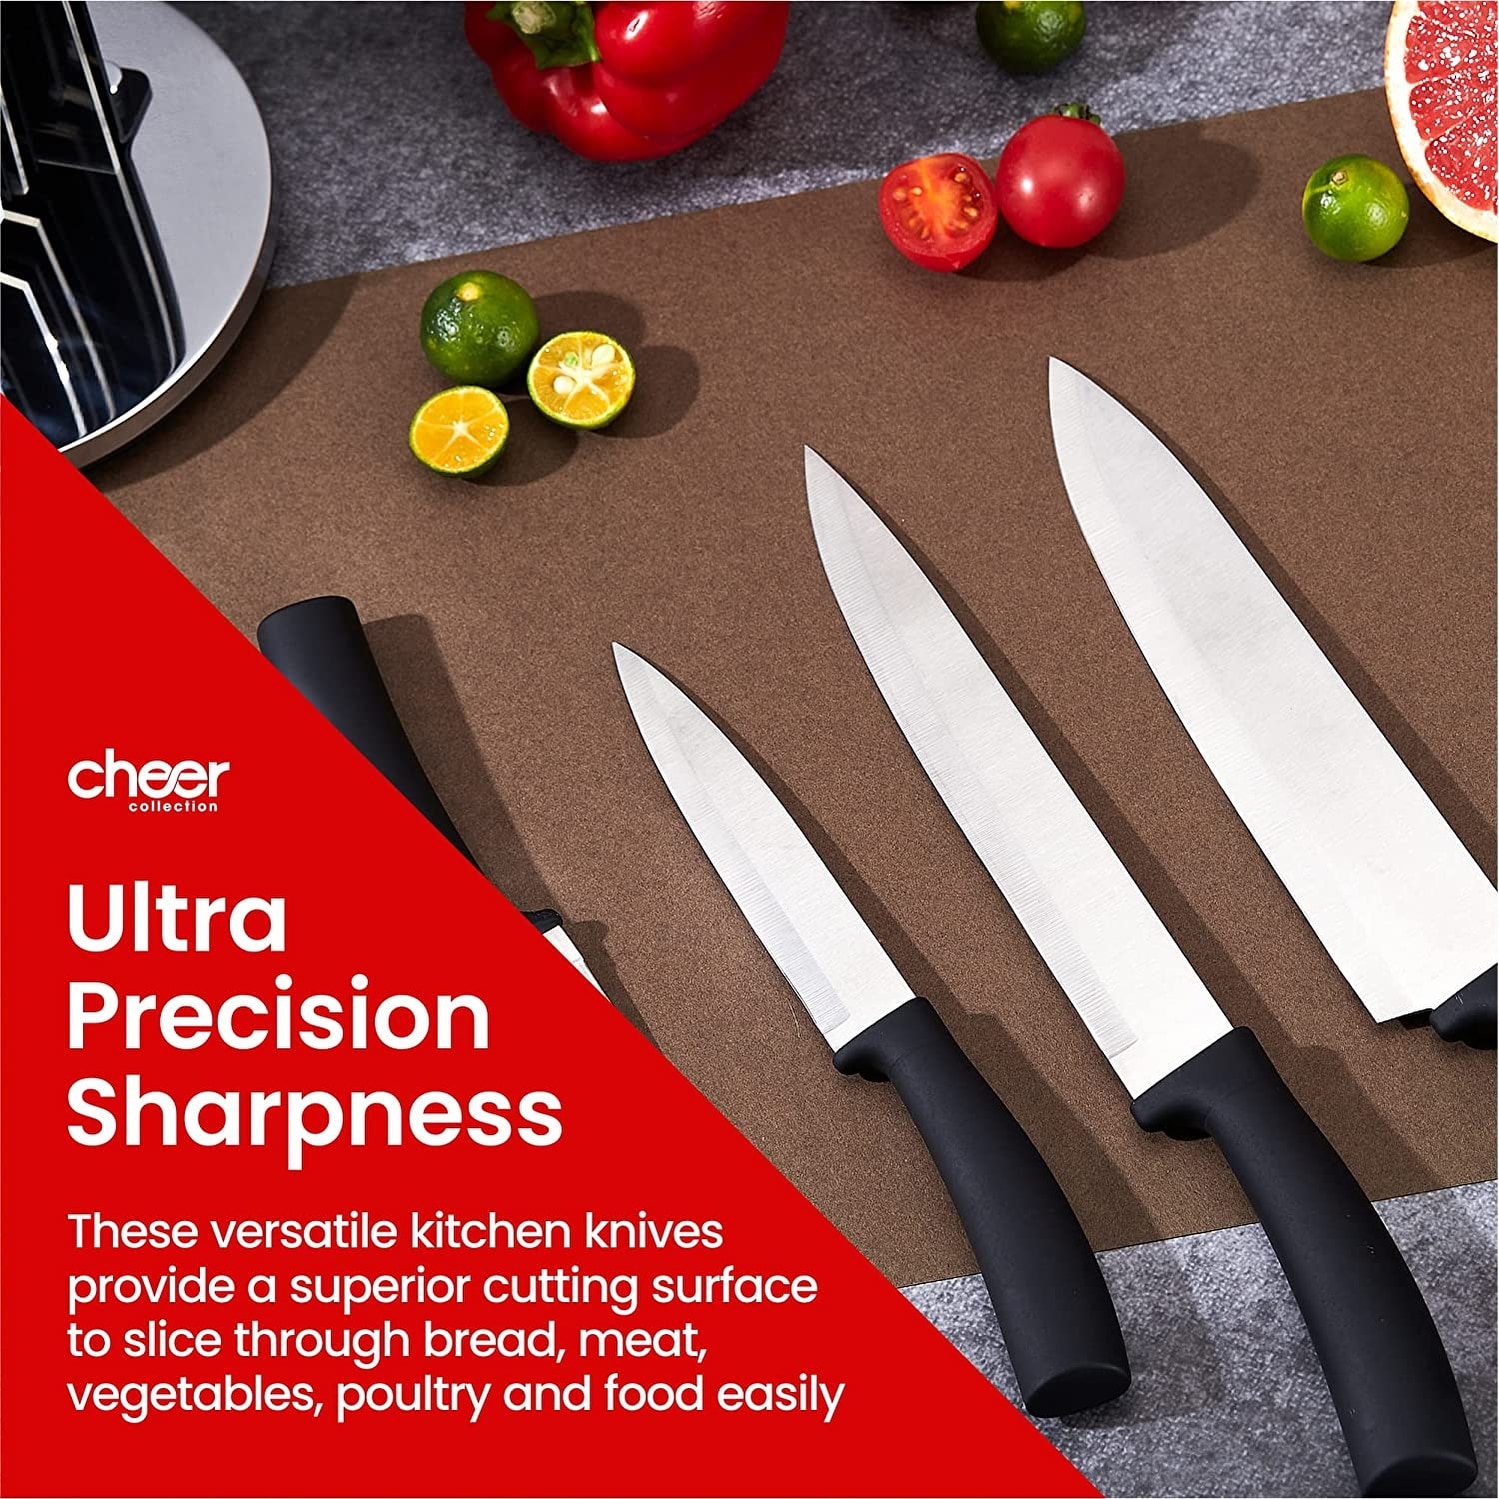 https://ak1.ostkcdn.com/images/products/is/images/direct/7396496c38486894f8b1e8c68f97be625531db20/Cheer-Collection-Chef-Knife-Set-%287-Piece%29-with-Rotating-Stand.jpg